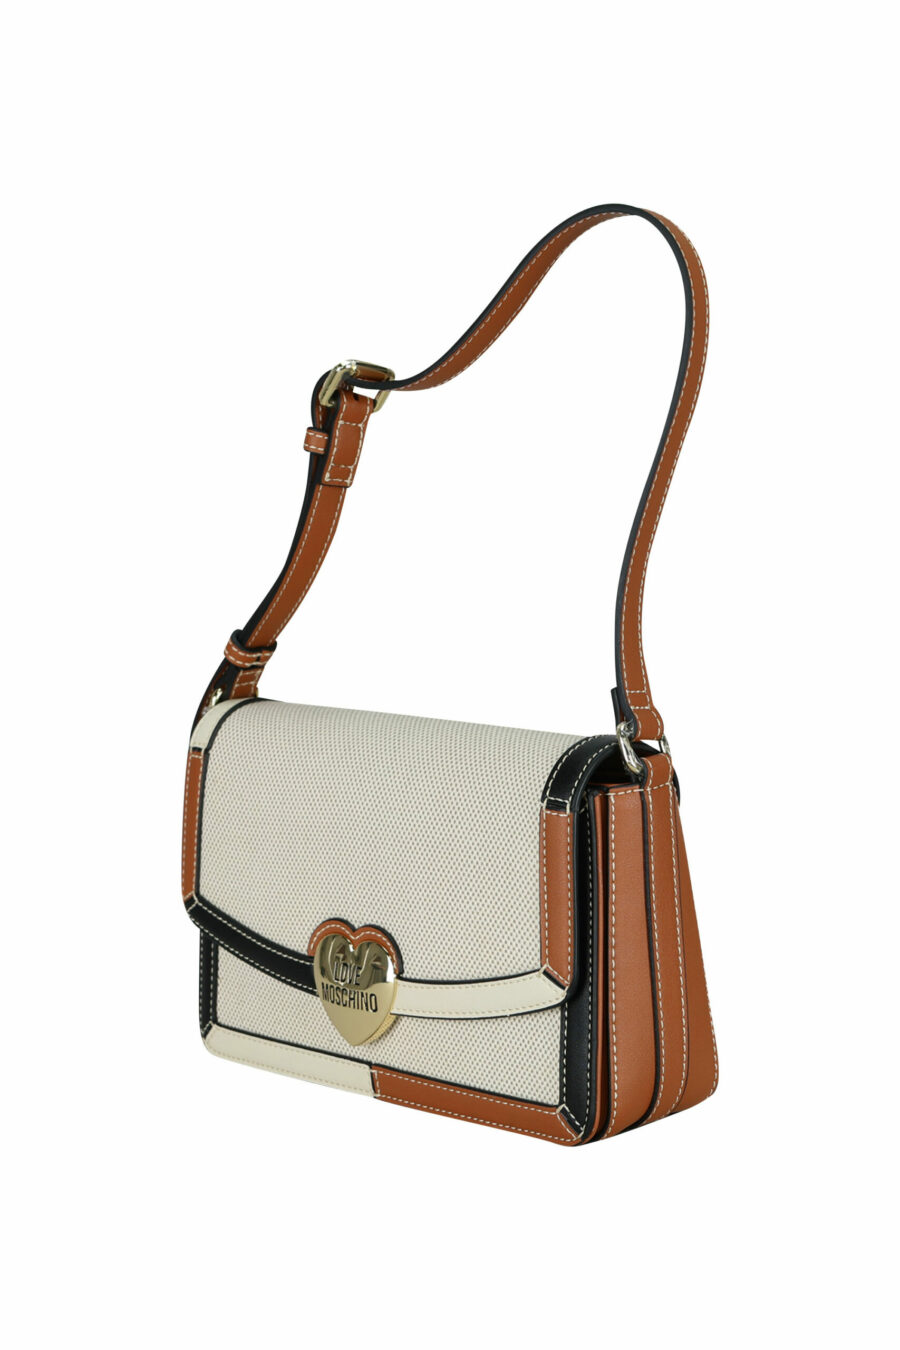 Brown and beige shoulder bag with mini pocket and gold metal heart logo - 8050537398592 1 scaled